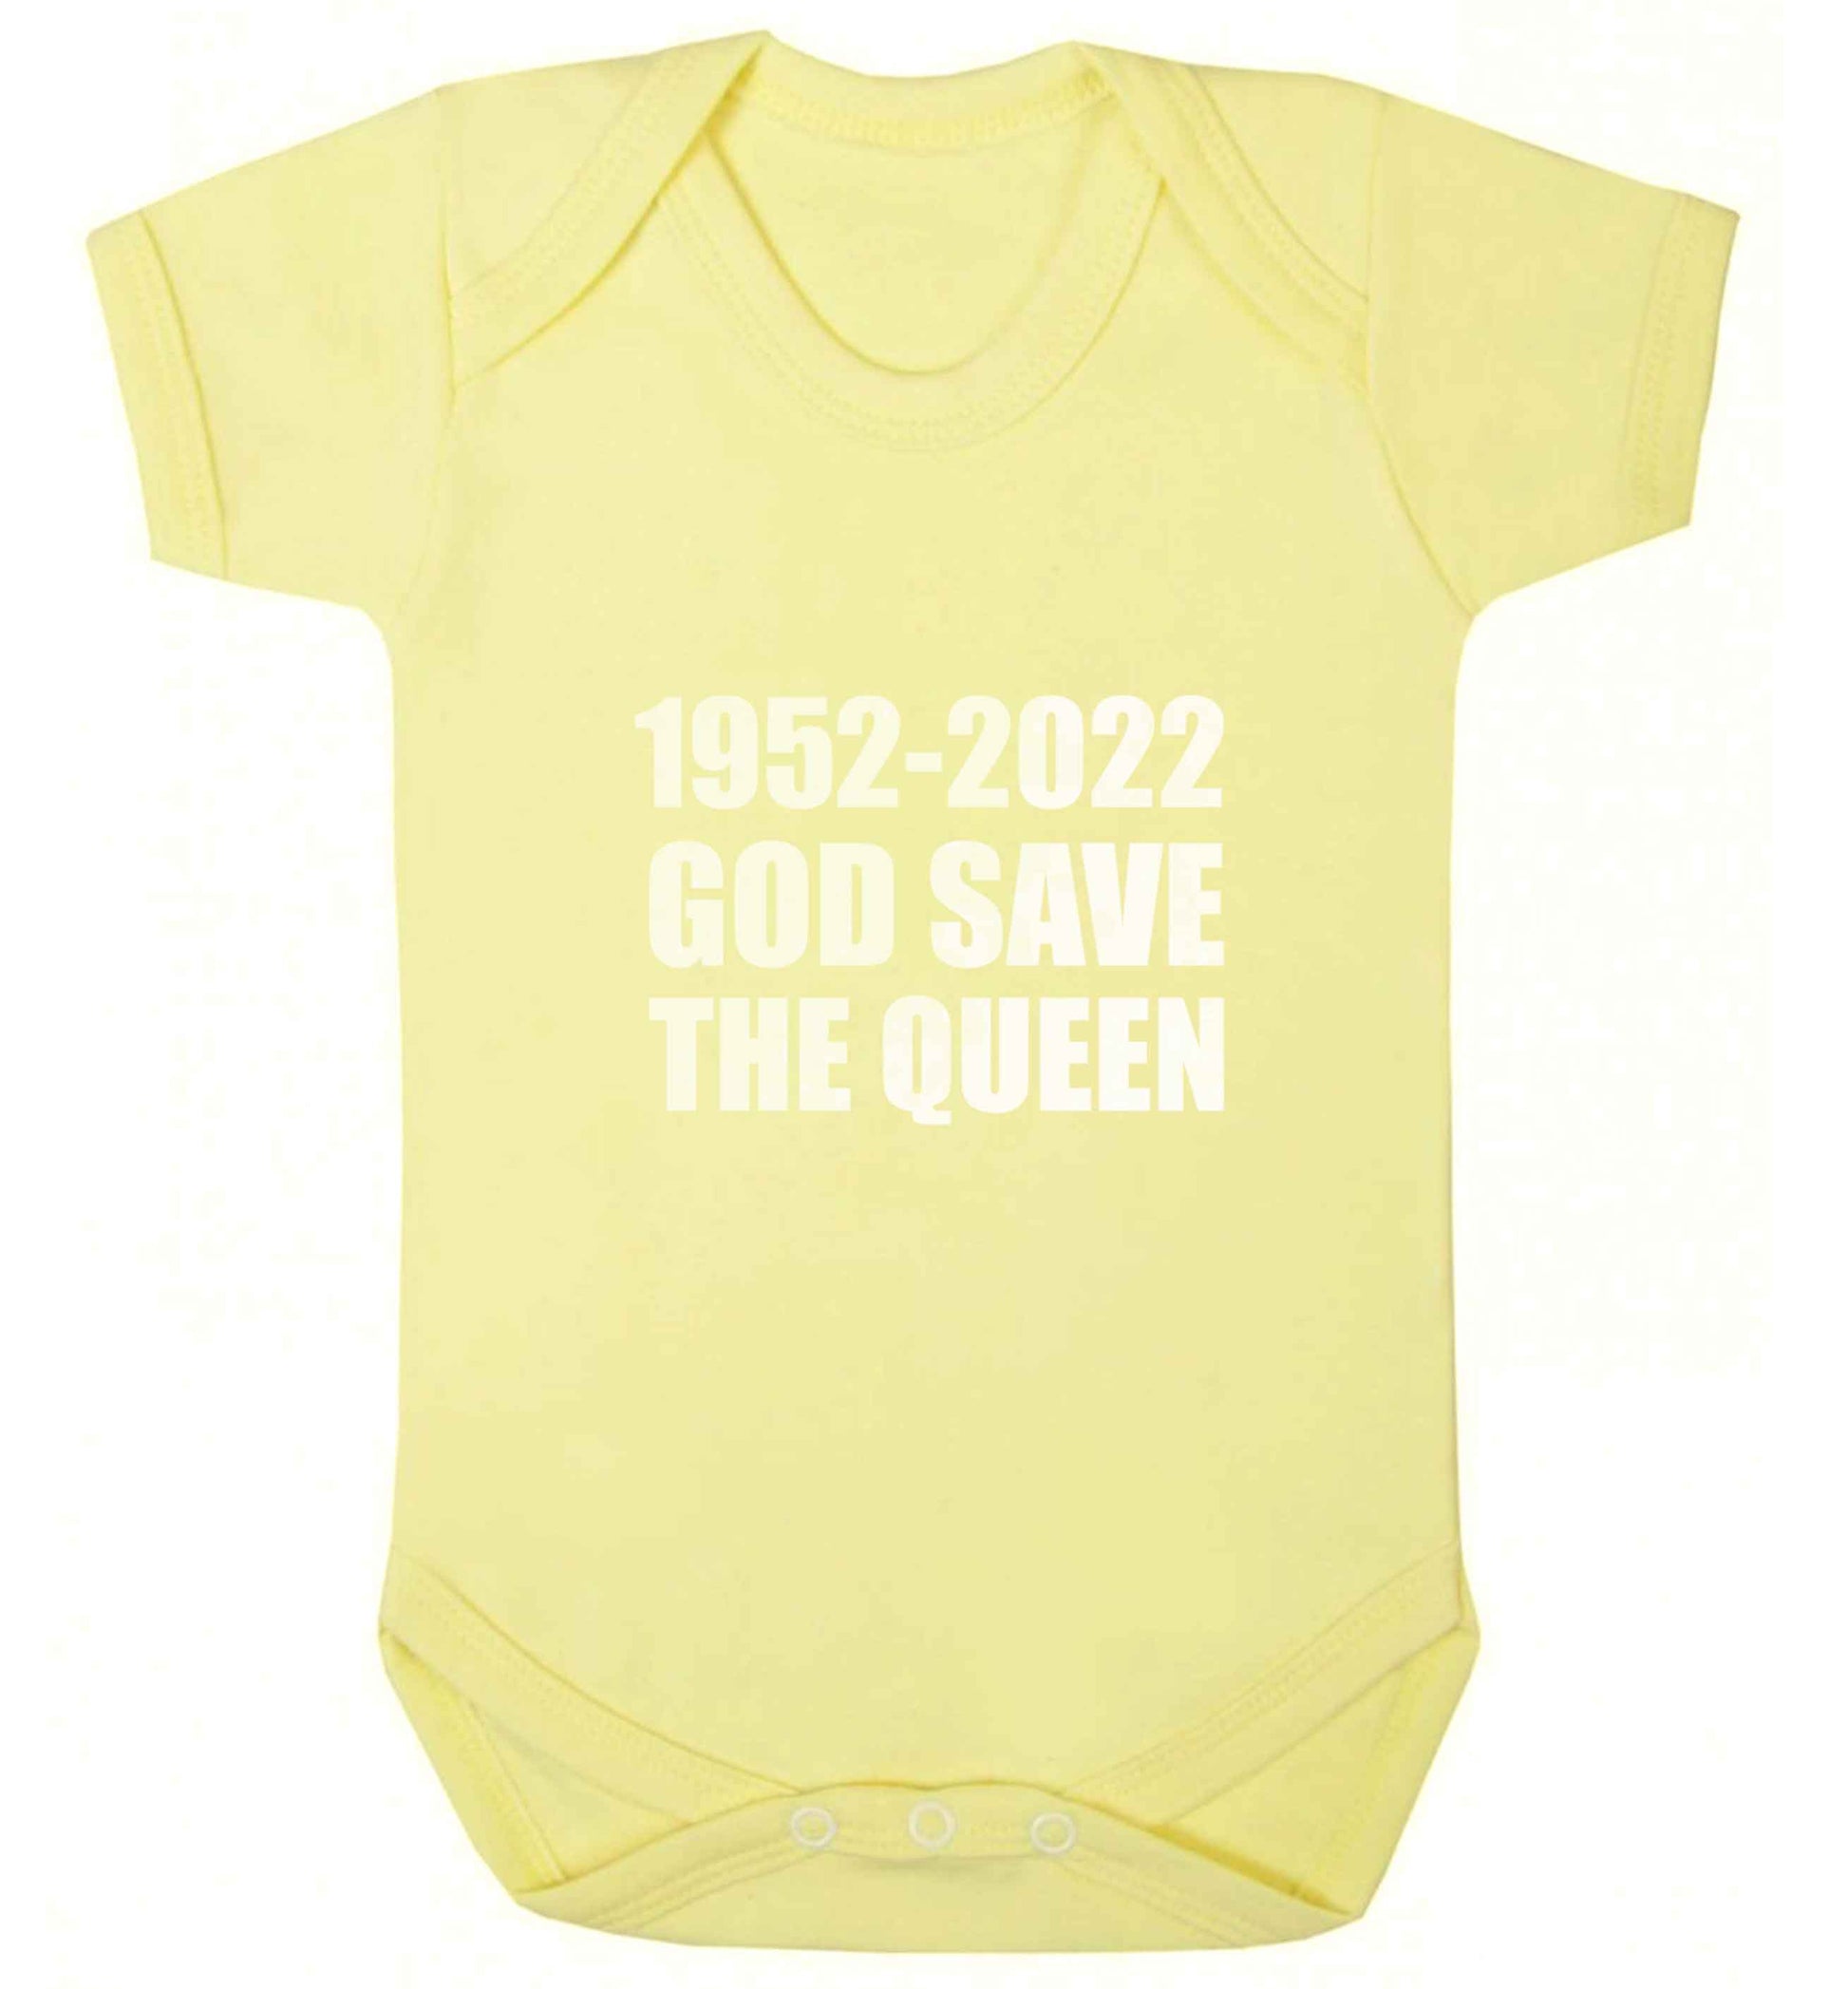 God save the queen baby vest pale yellow 18-24 months